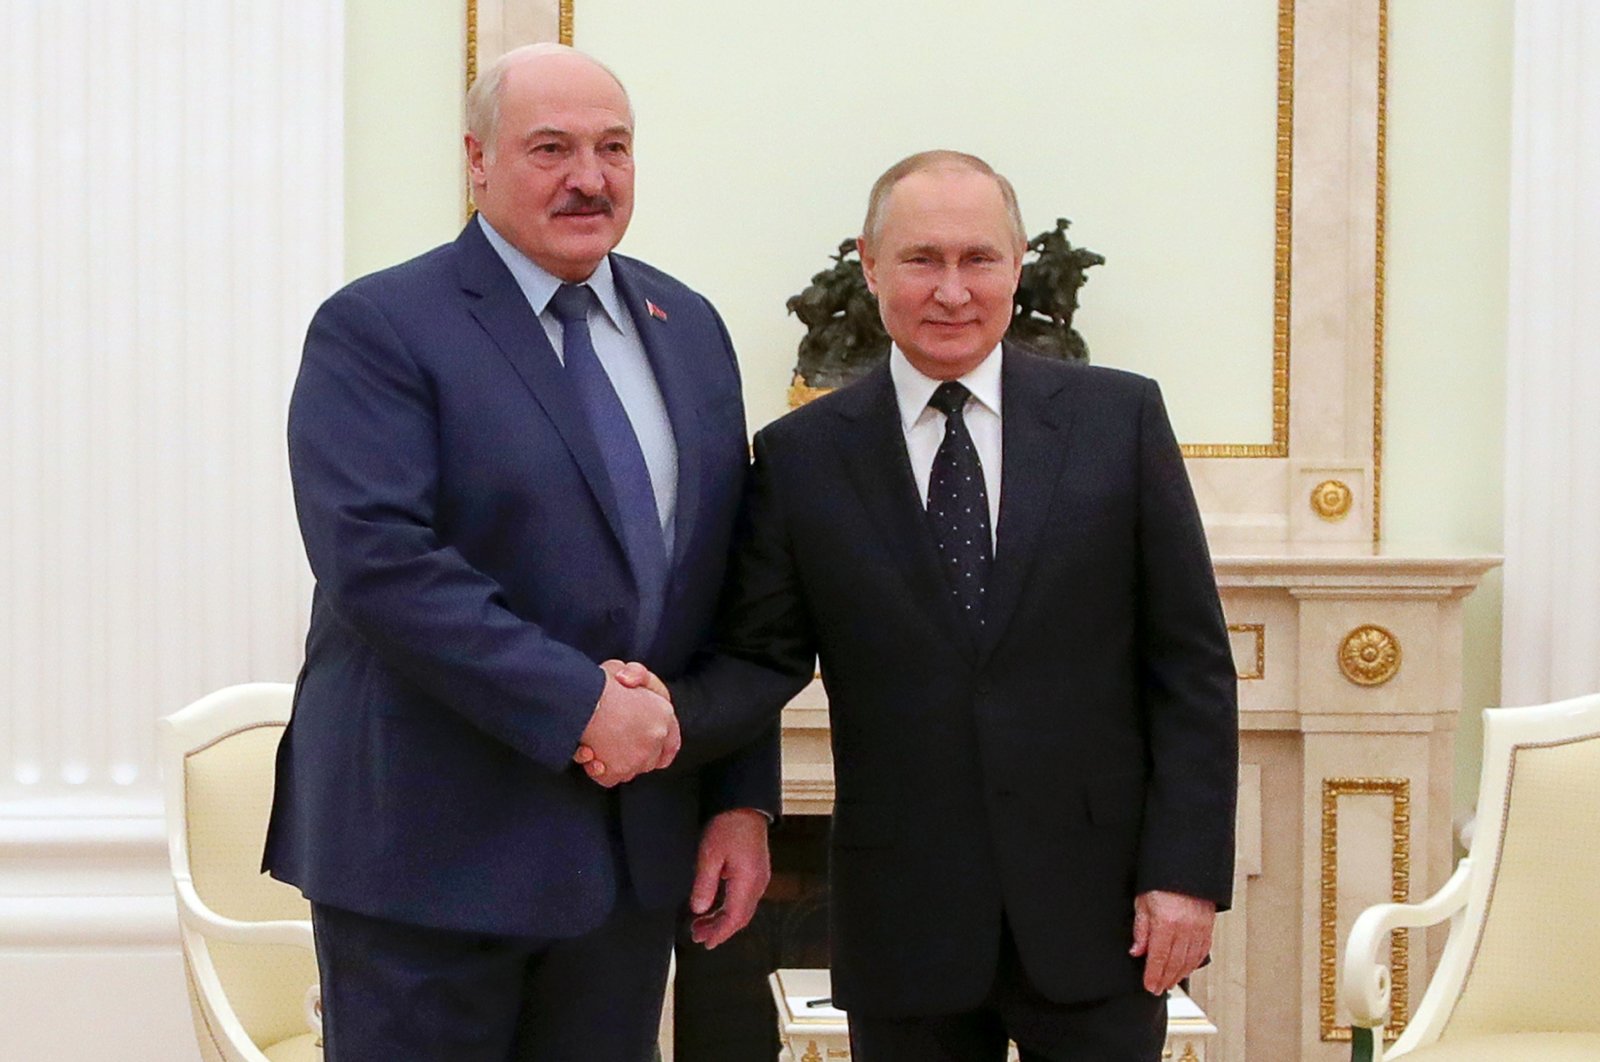 Russian President Vladimir Putin, (R), and Belarusian President Alexander Lukashenko pose for a photo during their meeting in Moscow, Russia, Friday, March 11, 2022. (AP Photo)